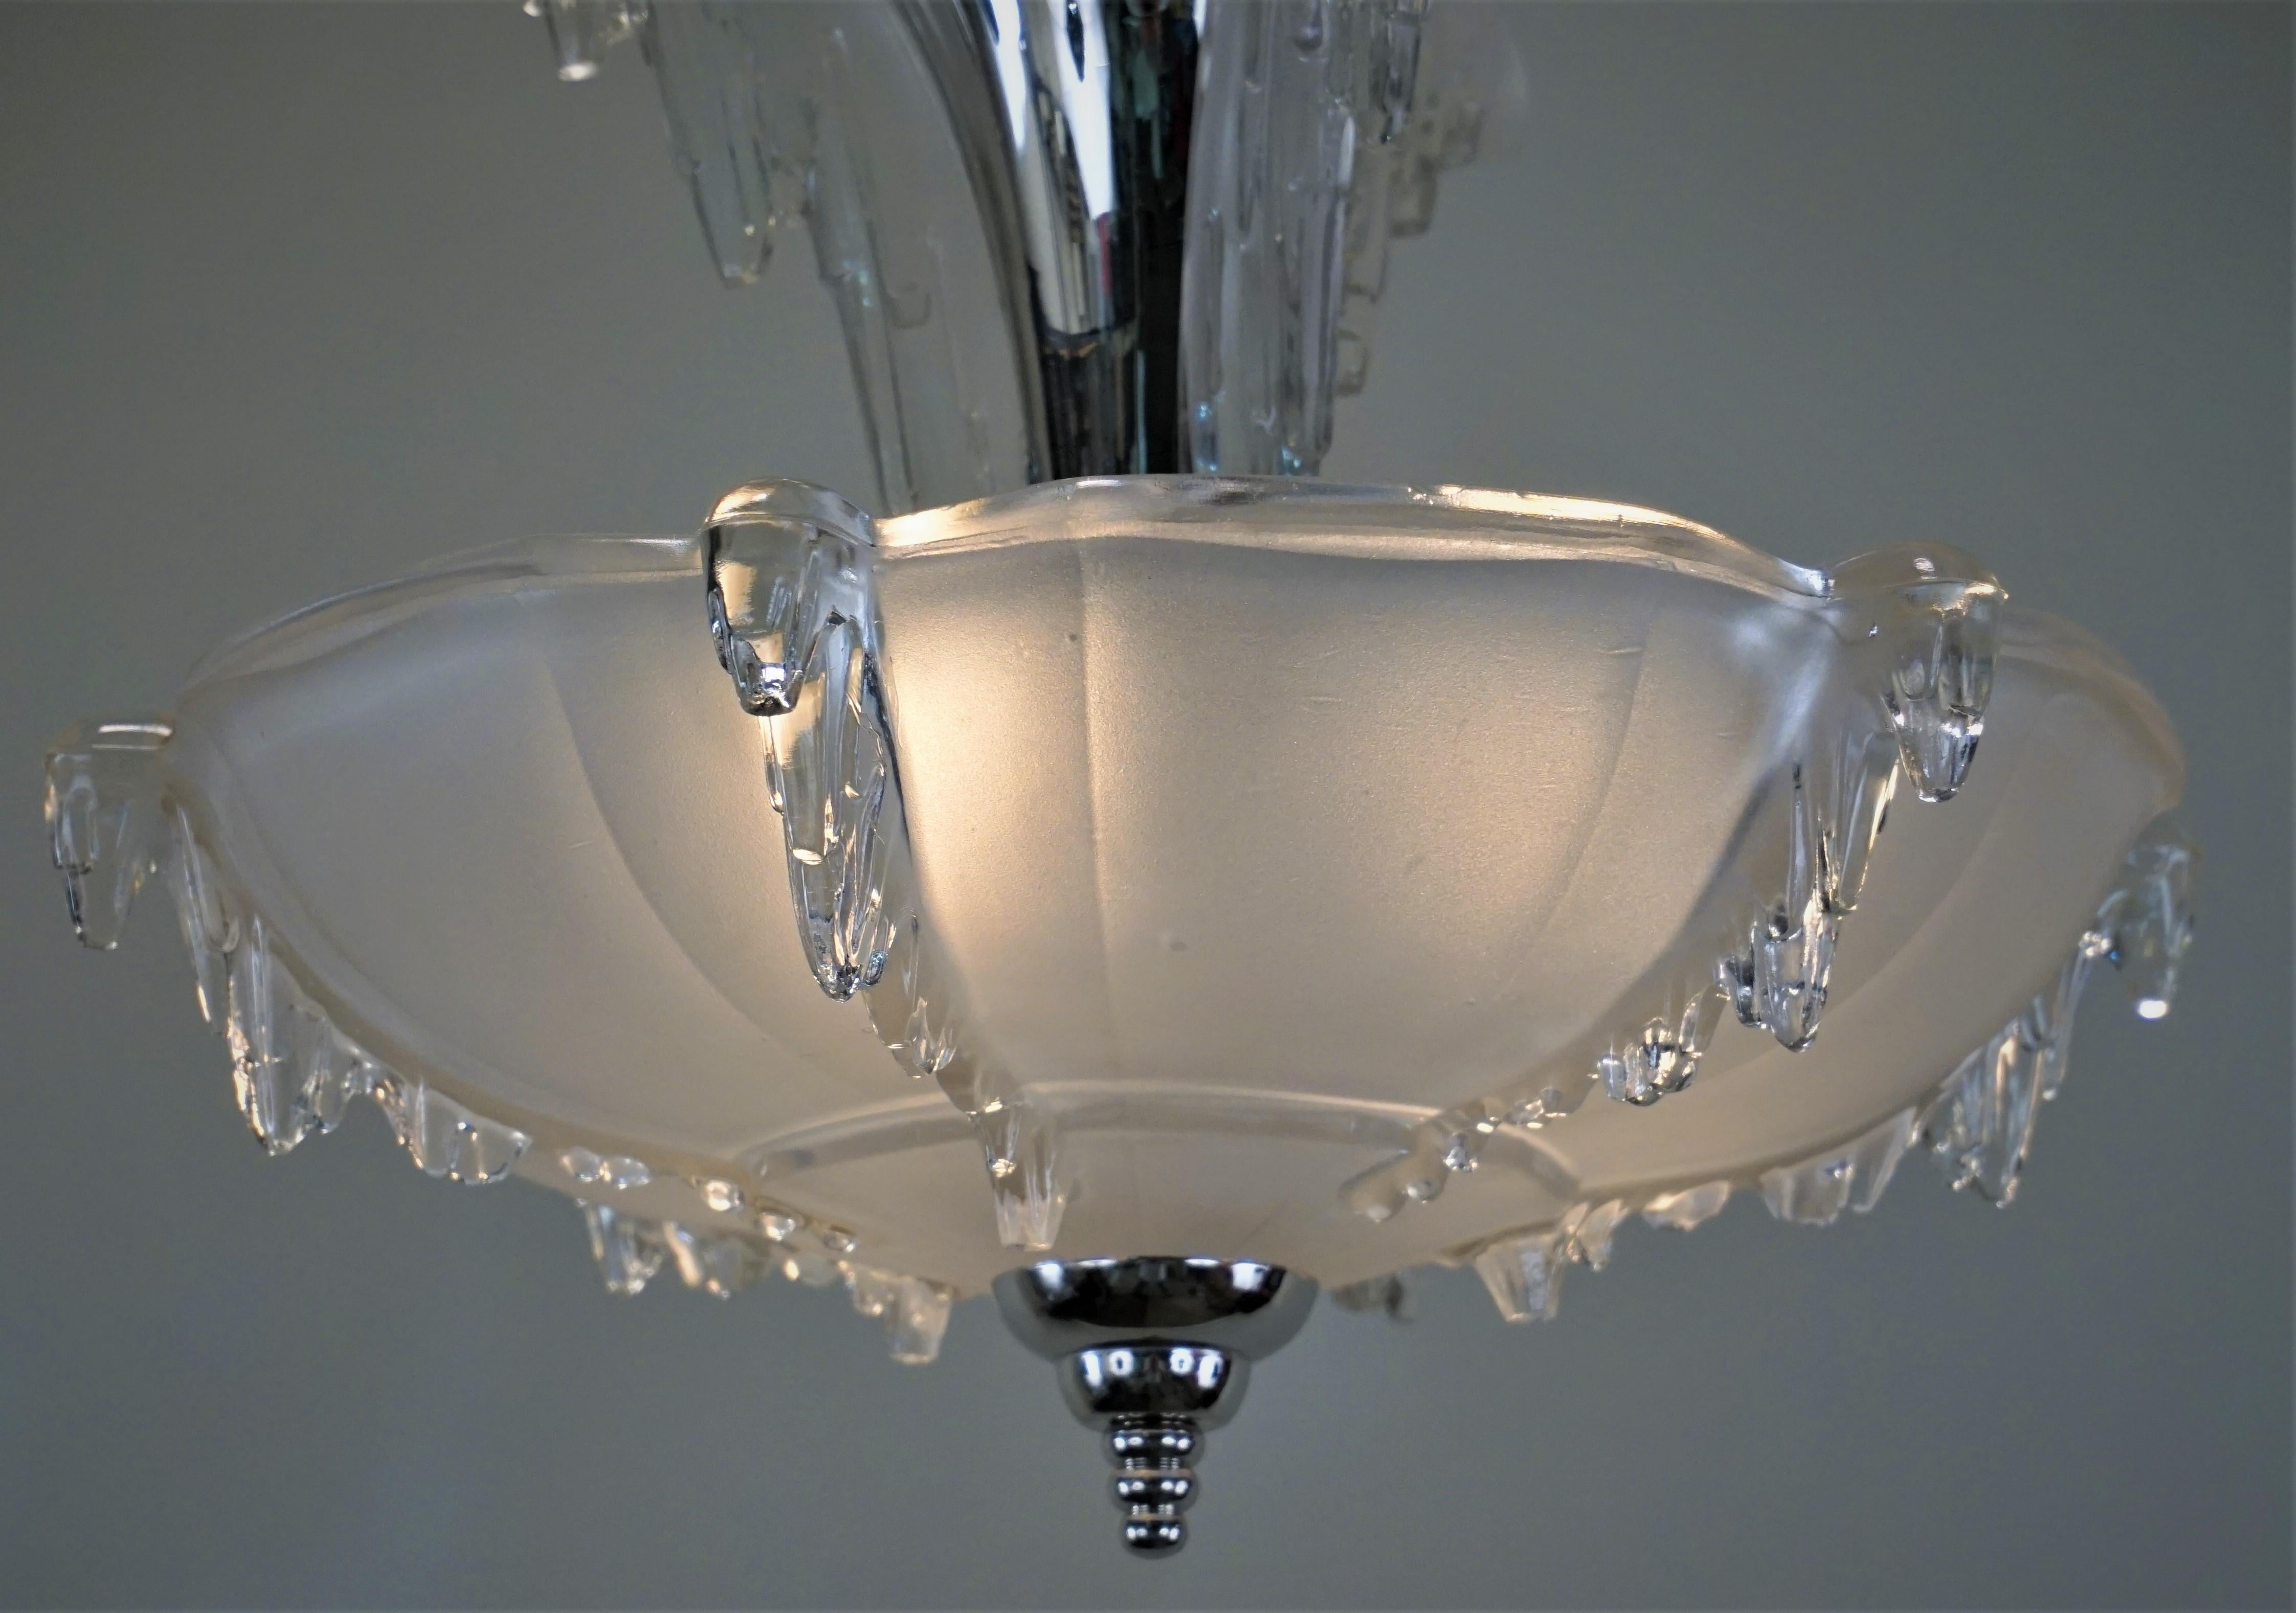 Clear Frost glass with polished nickel on bronze pendant, chandelier by Ezan.